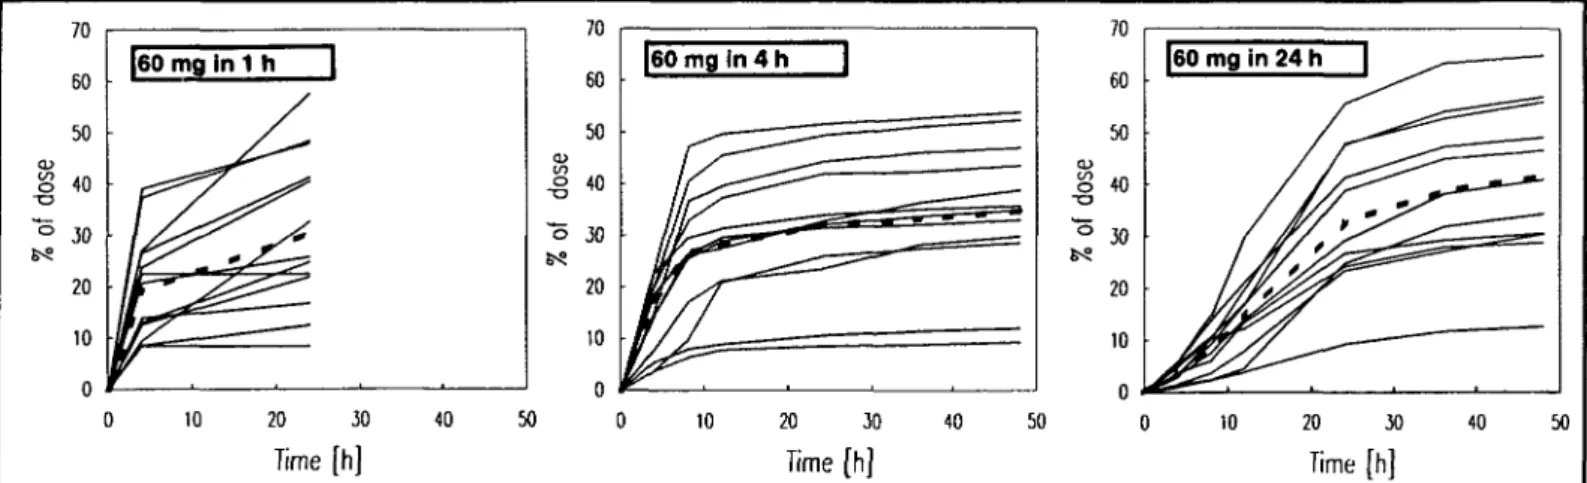 Fig. 1. Total unnary excretion [TUE (0-24 hours)] of each patient after an infusion of 60 mg of pamidronate disodium given over 24-, 4-, and 1 -hour periods at a constant infusion rate